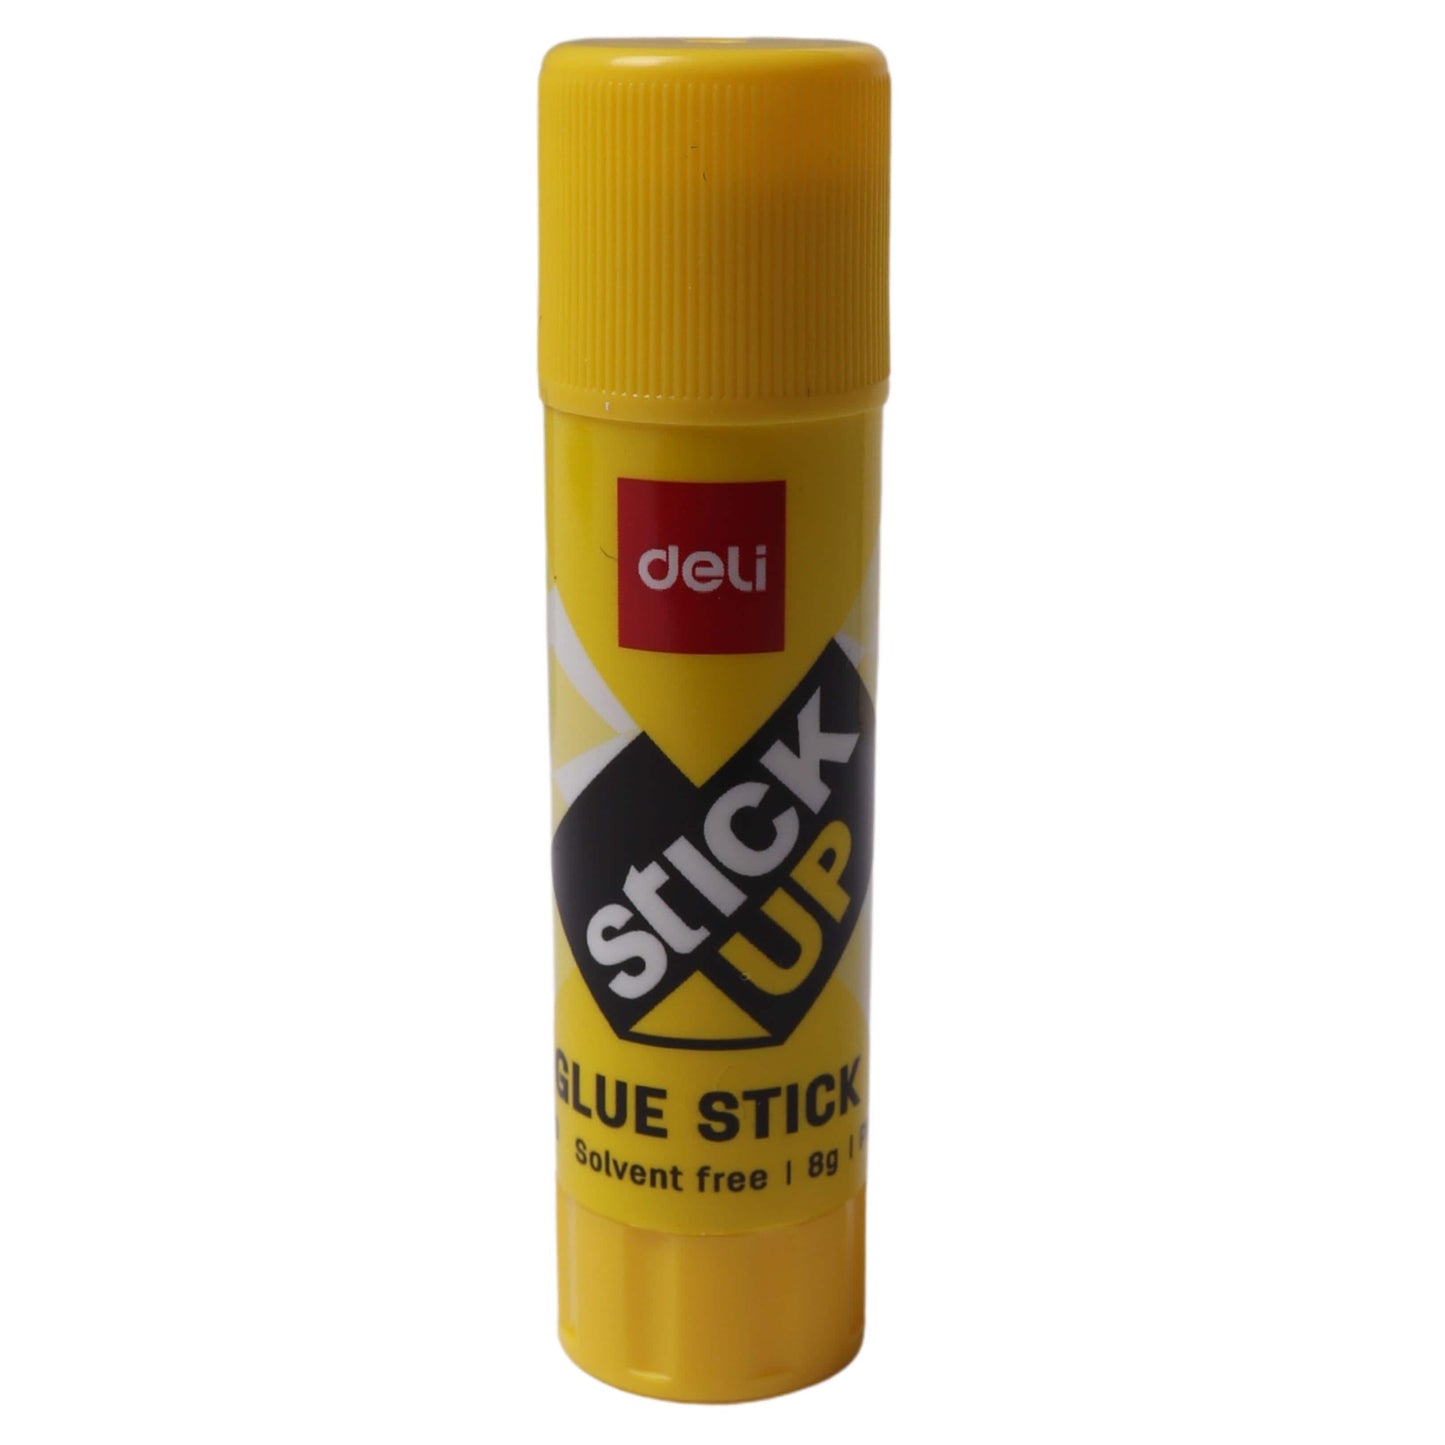 WITHUS School Bags & Supplies WITHUS - Glue Stick 8G